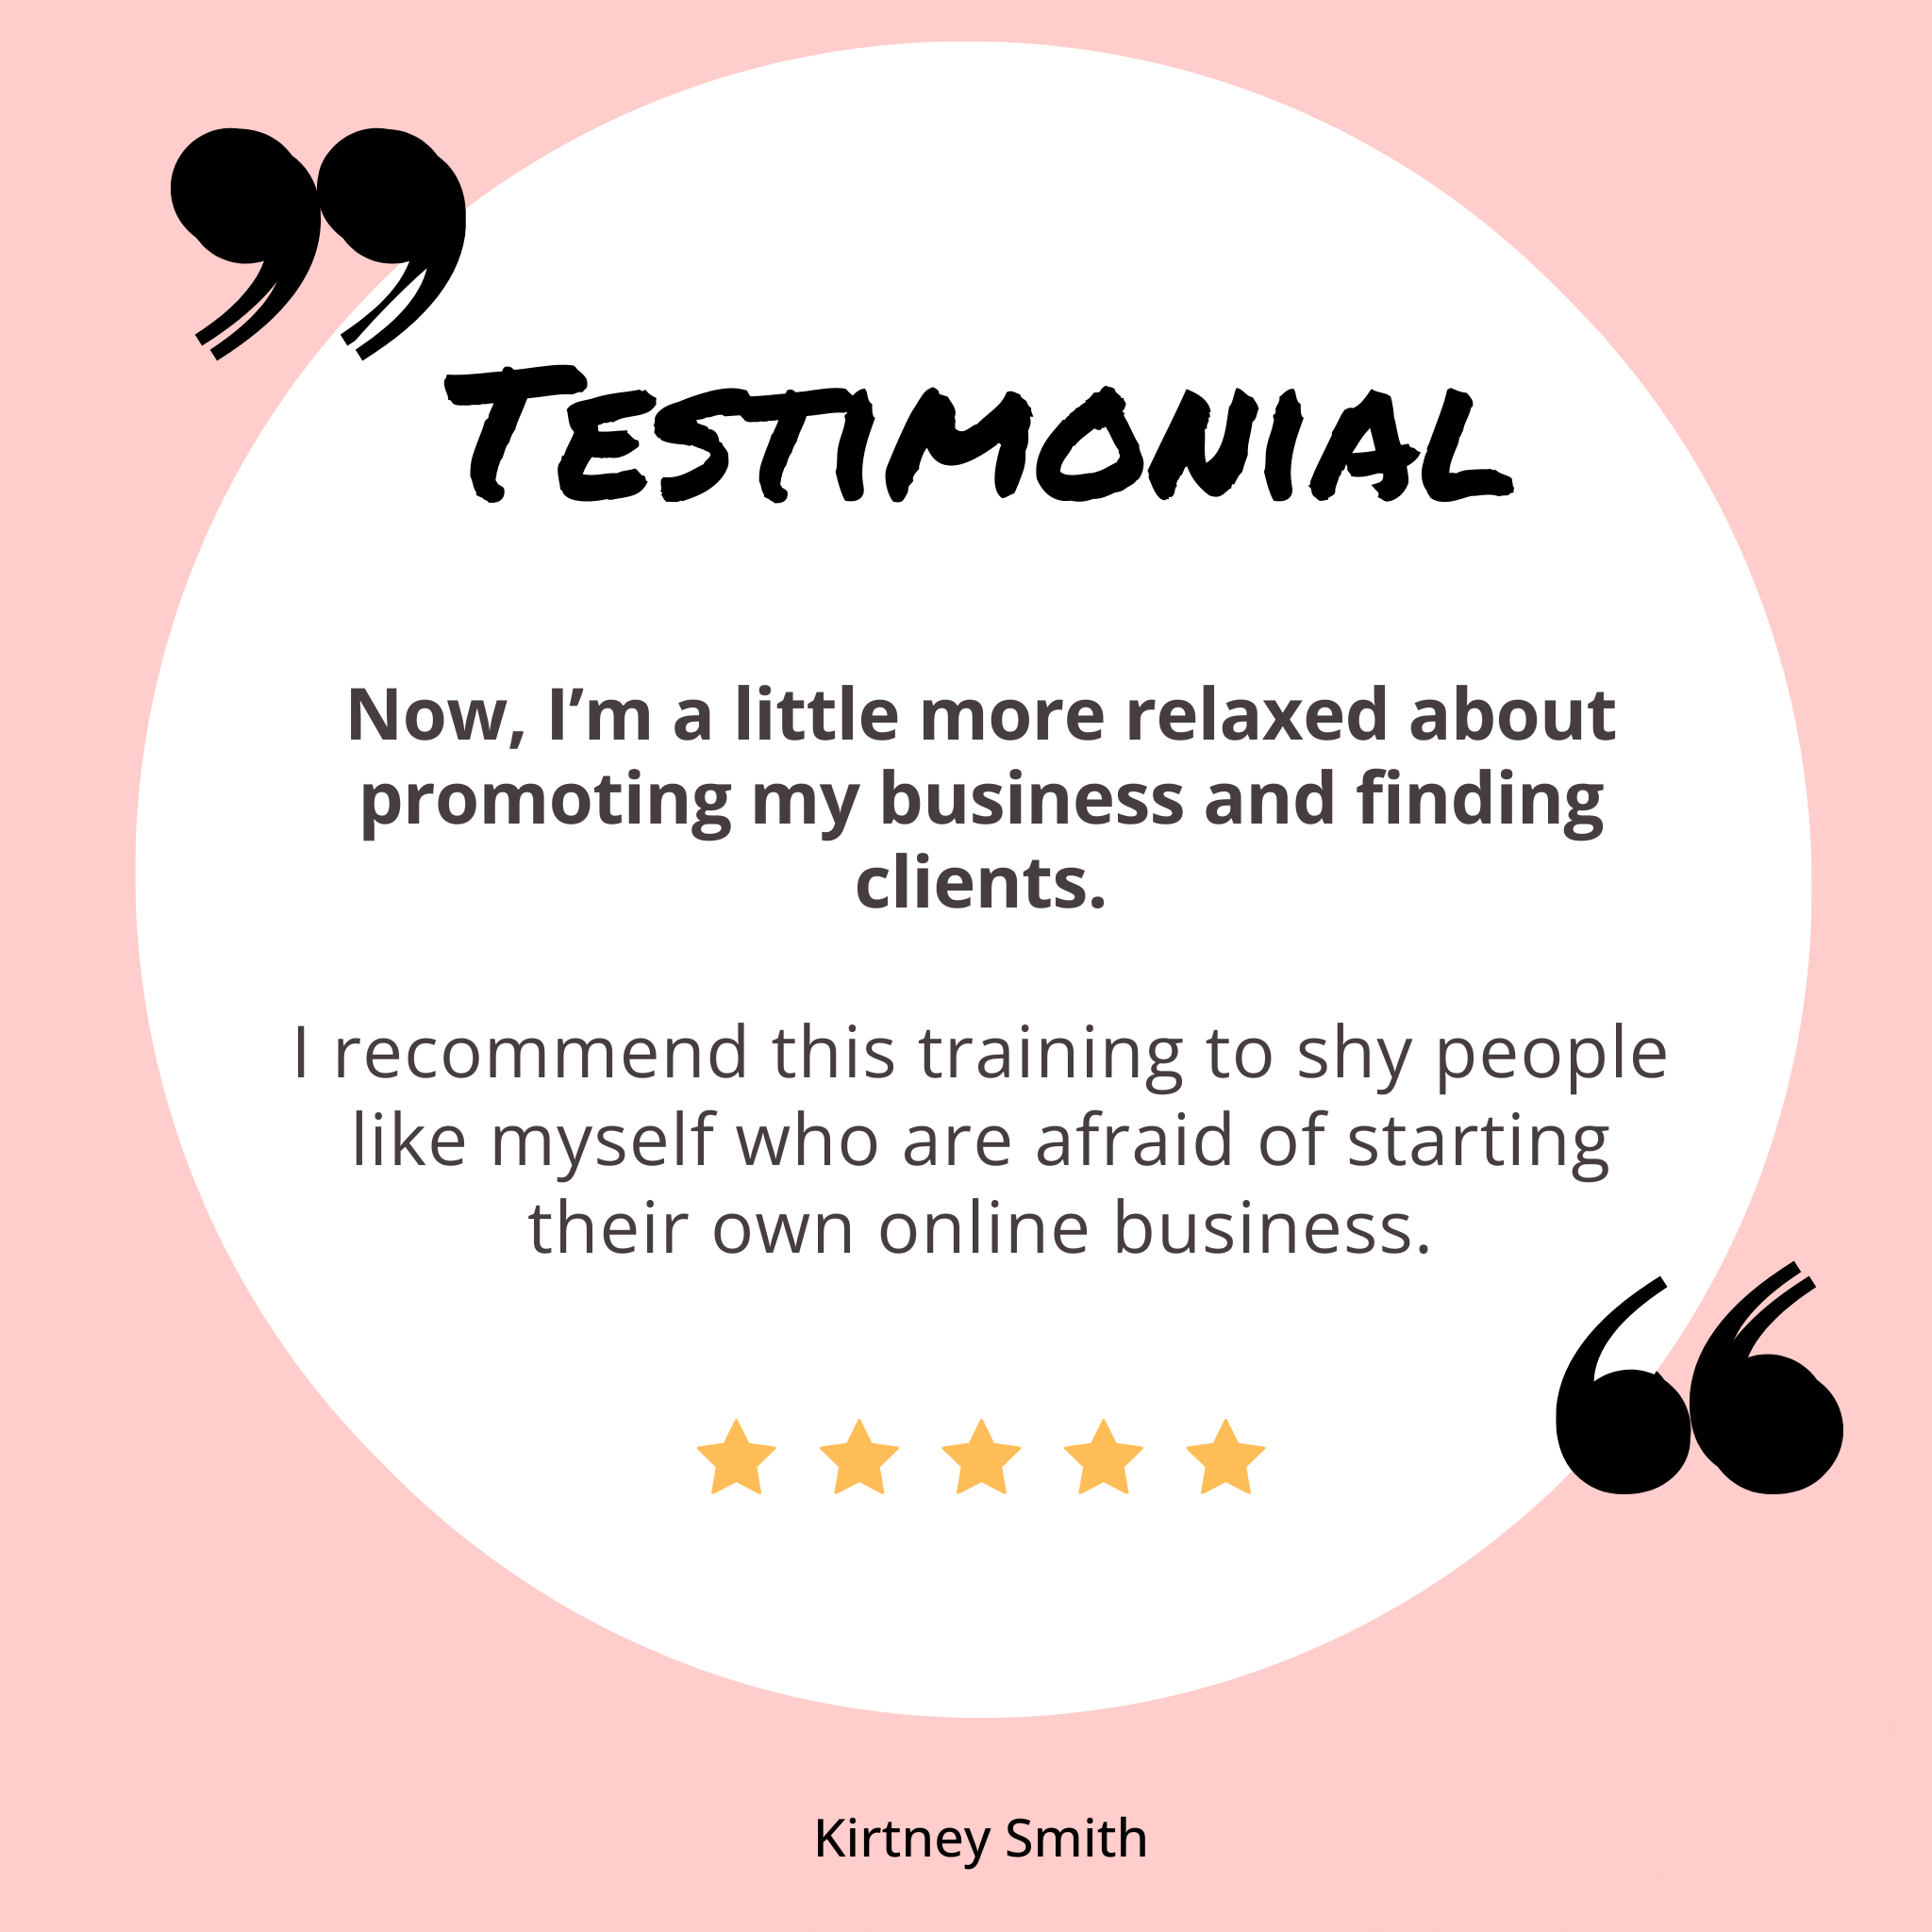 Kirtney's testimonial for the Go Get Your Clients training for virtual assistants.